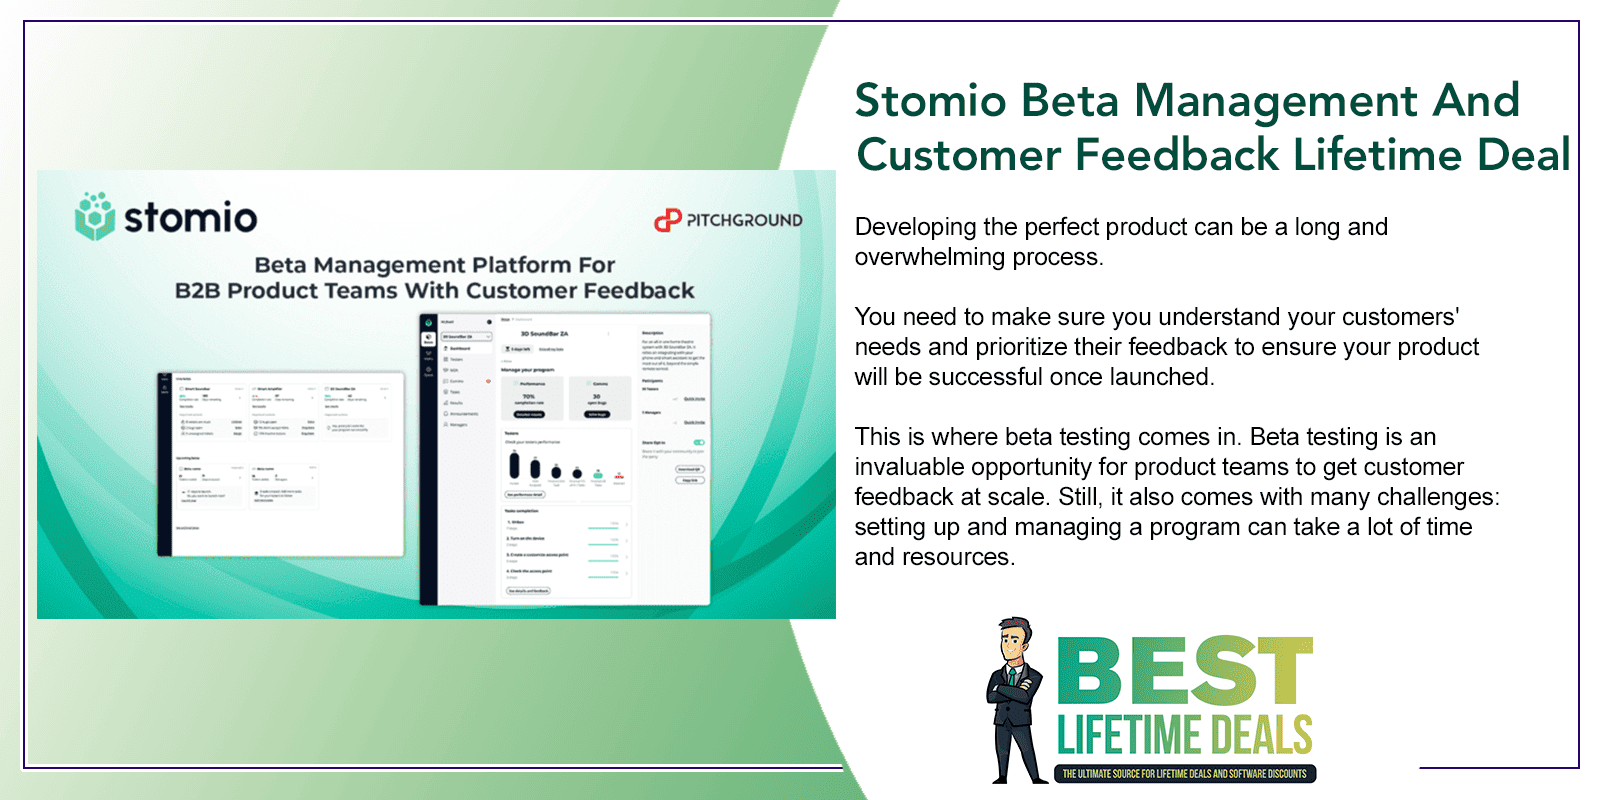 Stomio Beta Management And Customer Feedback Lifetime Deal